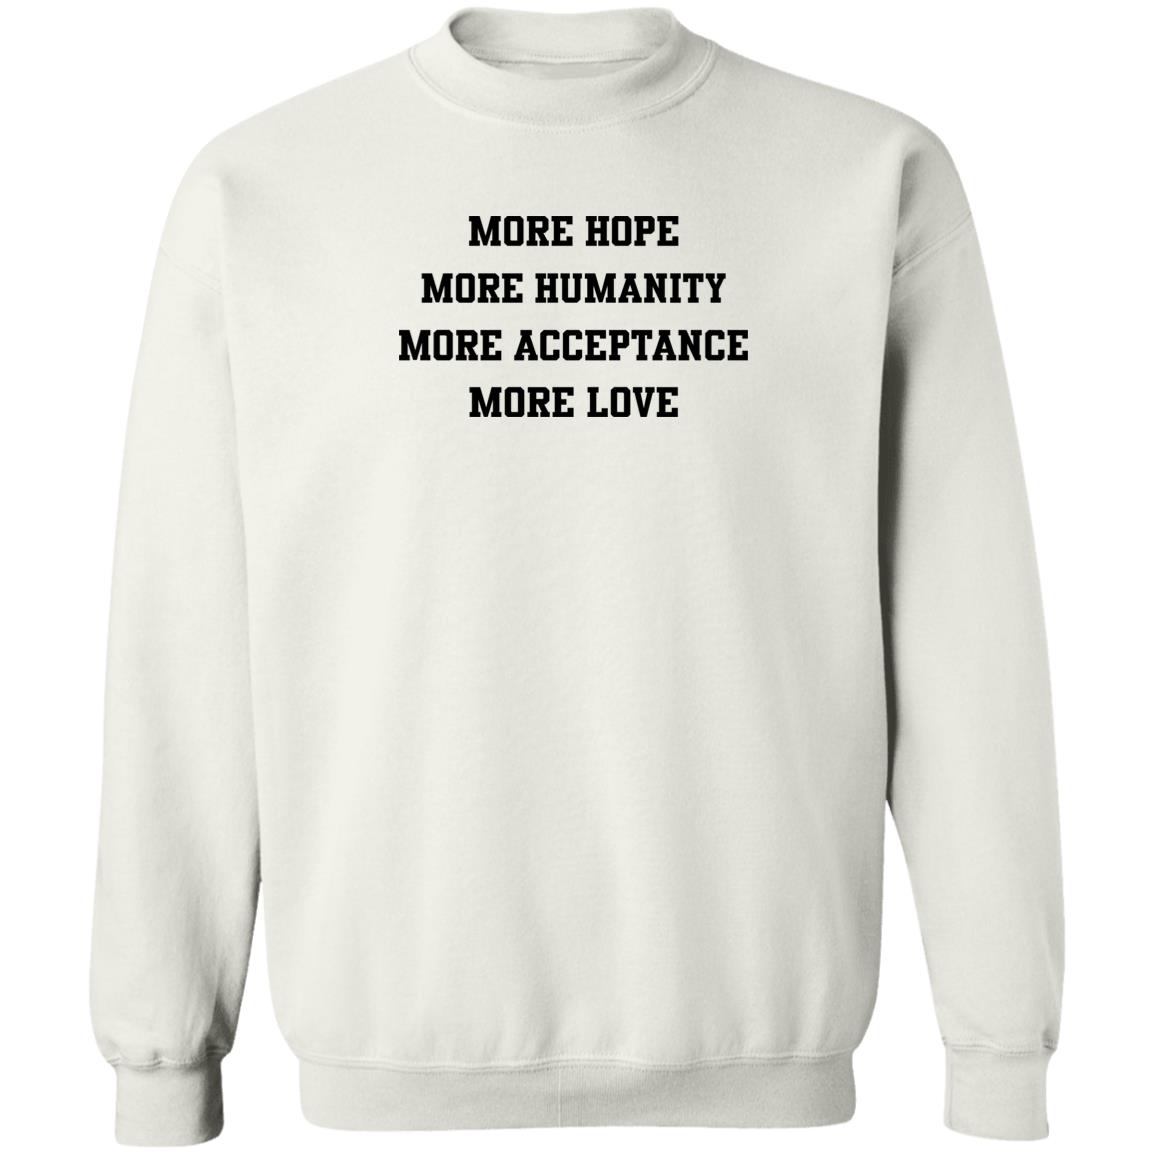 More Hope More Humanity More Acceptance More Love Shirt 2